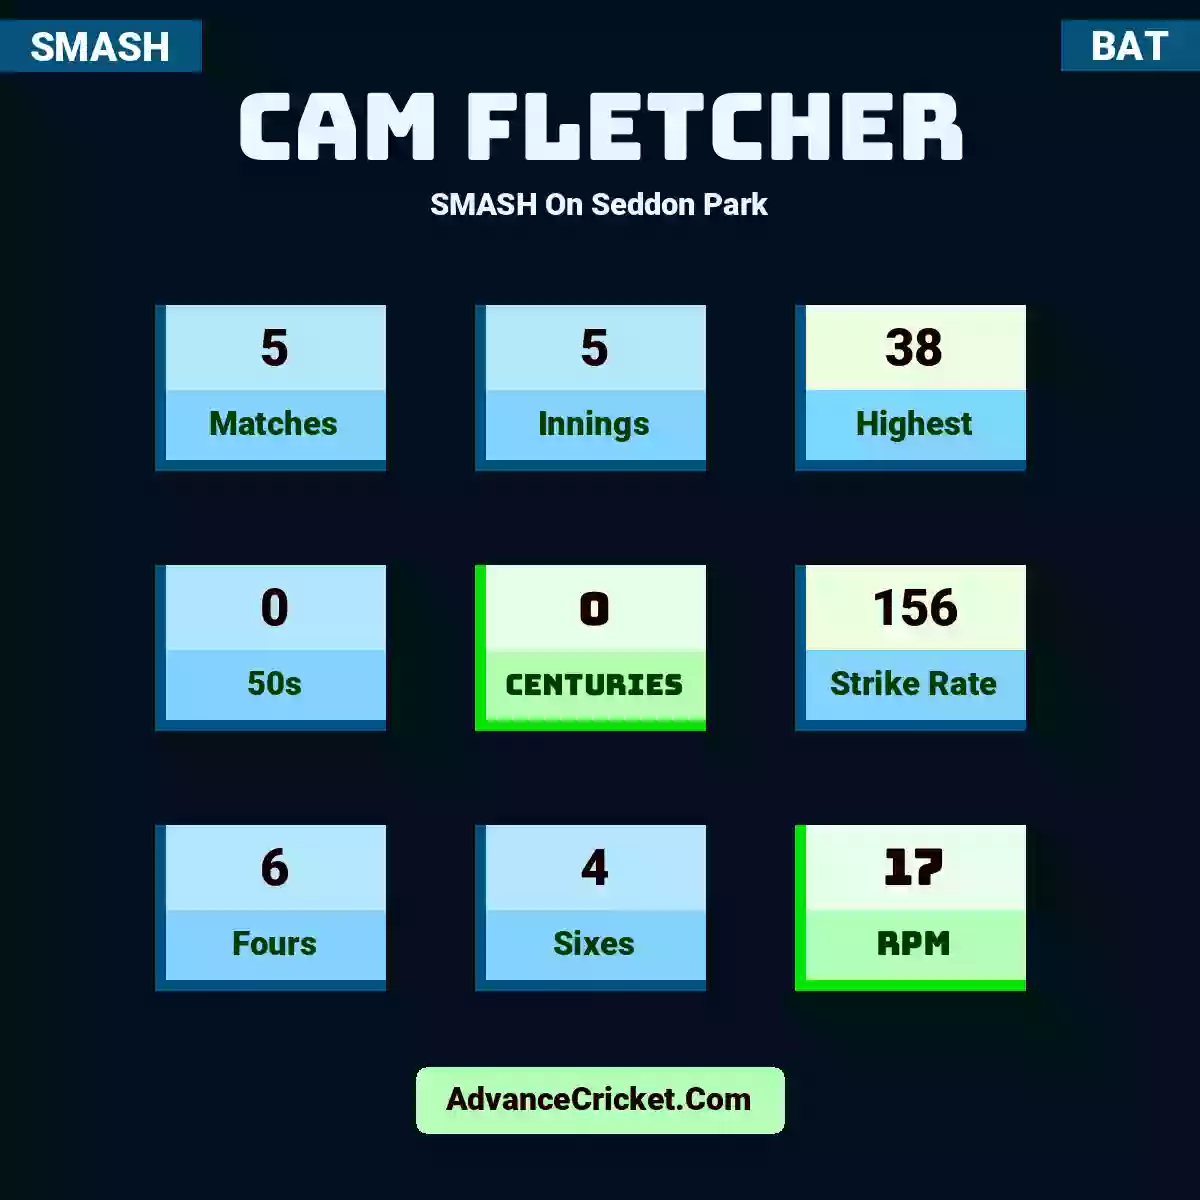 Cam Fletcher SMASH  On Seddon Park, Cam Fletcher played 5 matches, scored 38 runs as highest, 0 half-centuries, and 0 centuries, with a strike rate of 156. C.Fletcher hit 6 fours and 4 sixes, with an RPM of 17.